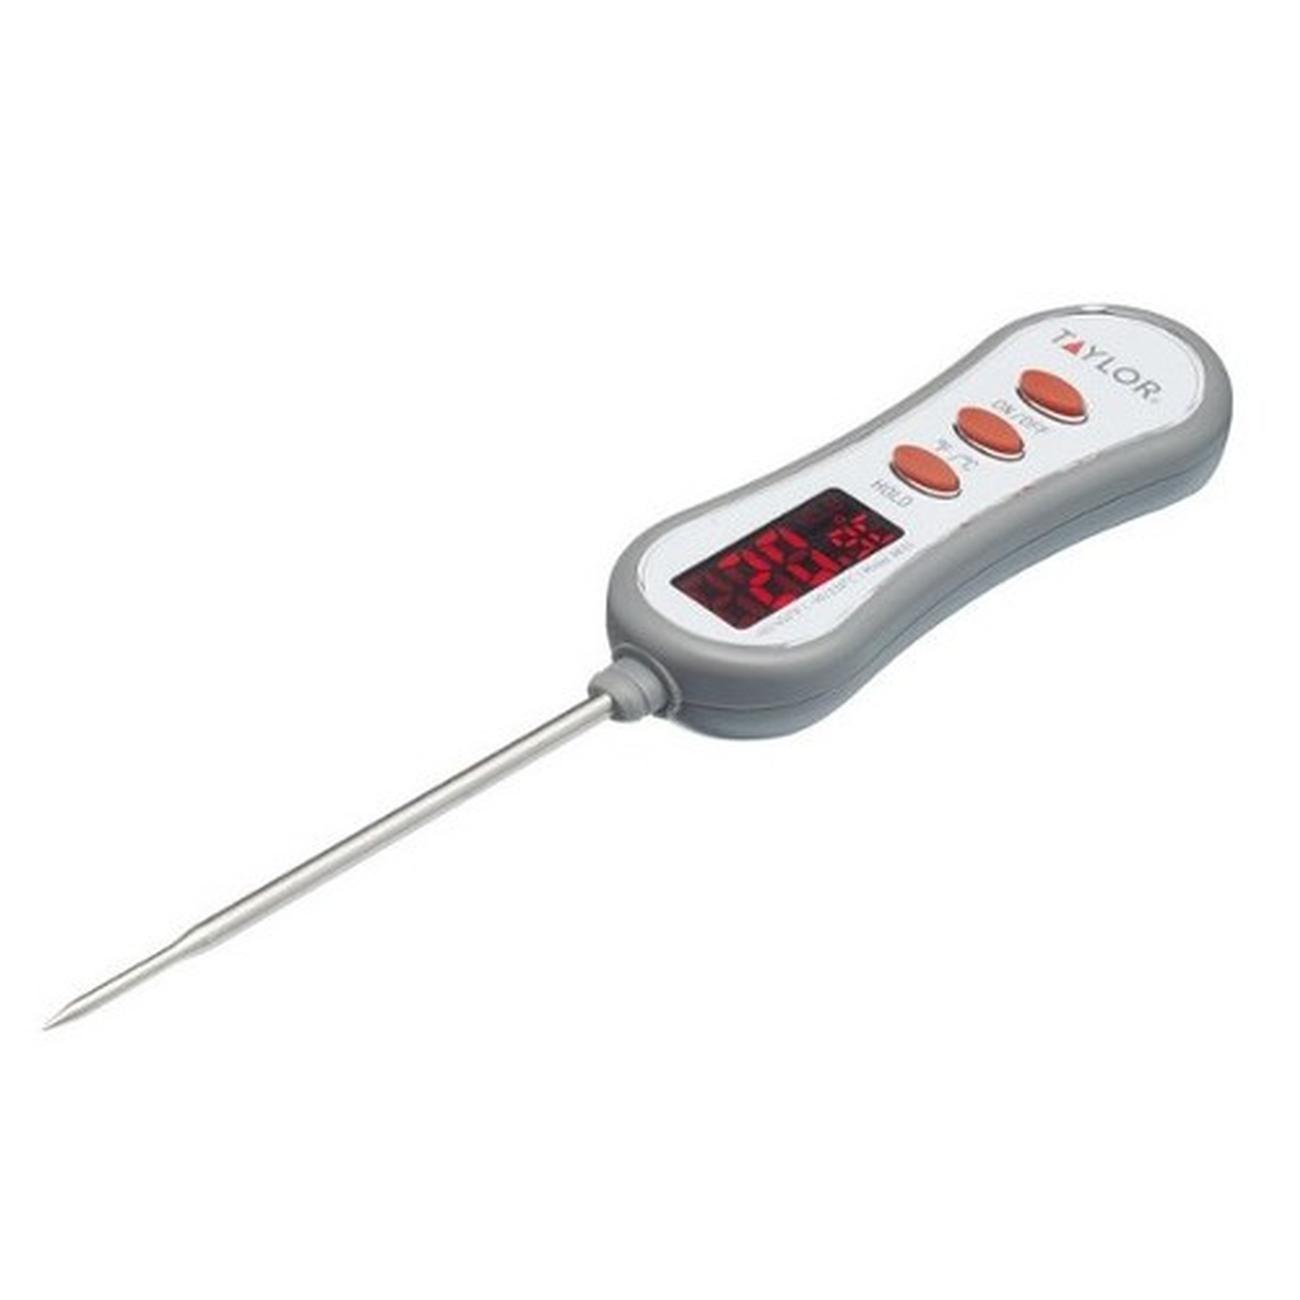 https://www.thekitchenwhisk.ie/contentfiles/productImages/Large/Taylor-Pro-Digital-Step-Stem-Thermometer-probe1.jpg